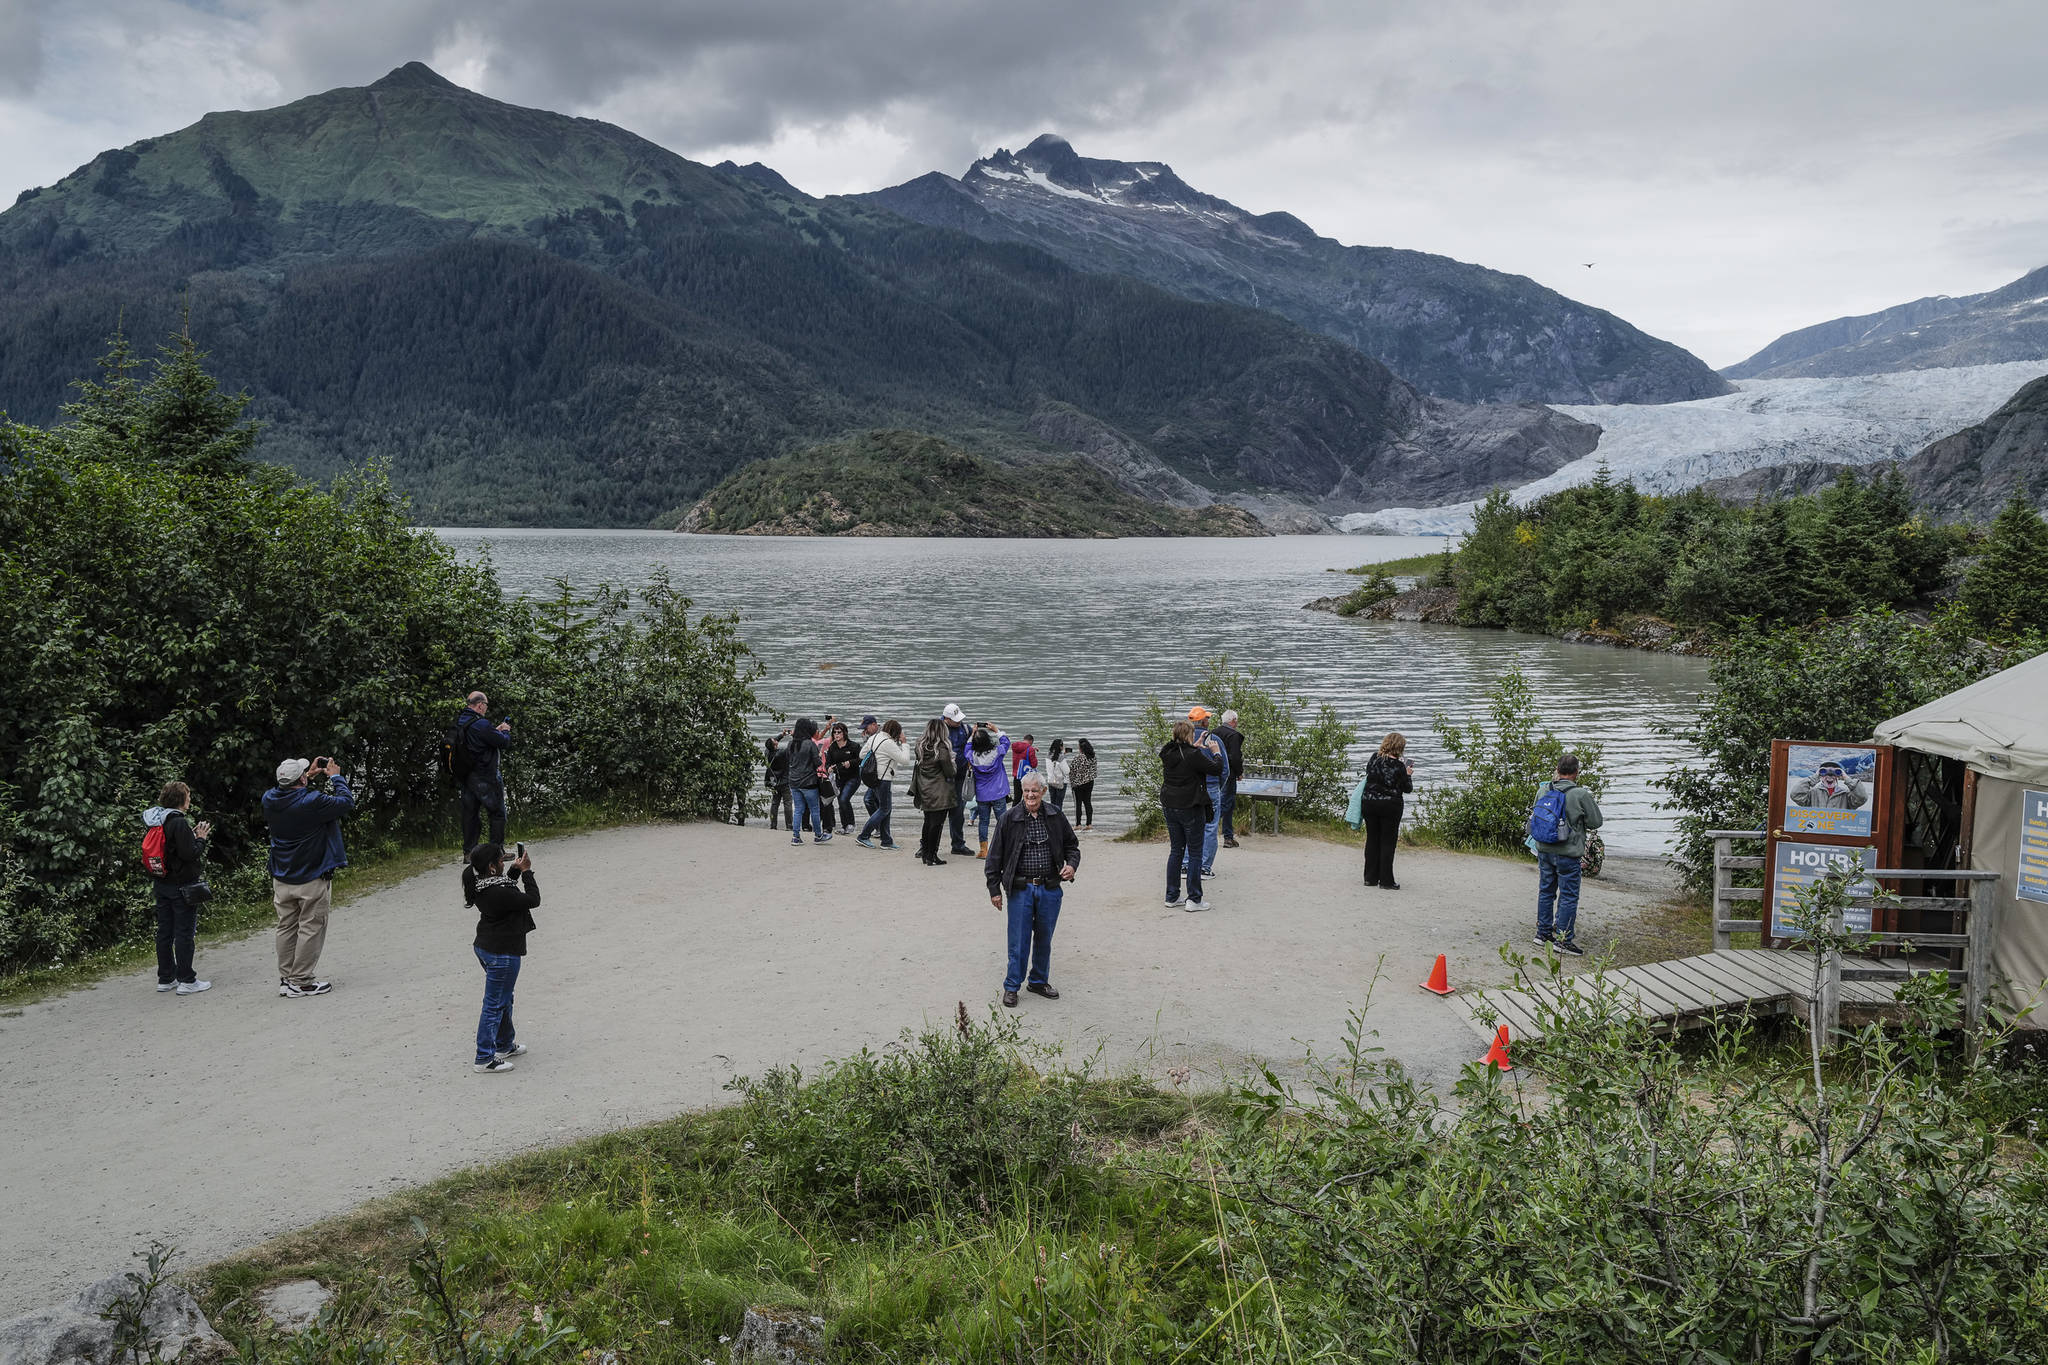 Visitors at Mendenhall Lake on Monday, July 15, 2019. A glacial lake outburst flood from Suicide Basin released into Mendenhall Lake last week and peaked Sunday night. (Michael Penn | Juneau Empire)